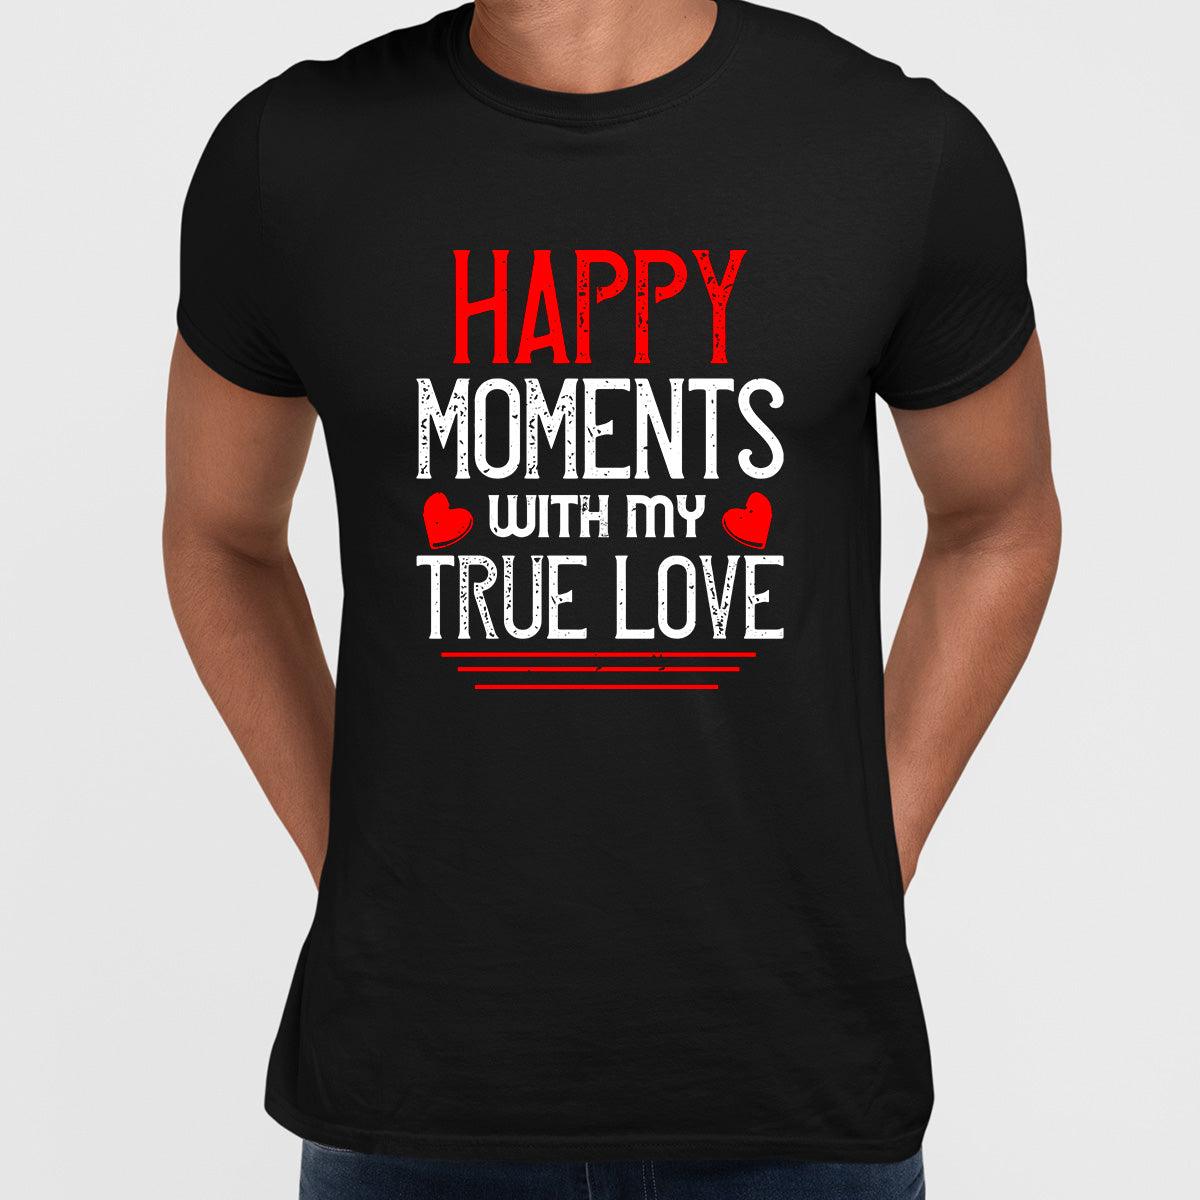 Happy moments with my true love - valentine's day T-shirt edition - Kuzi Tees